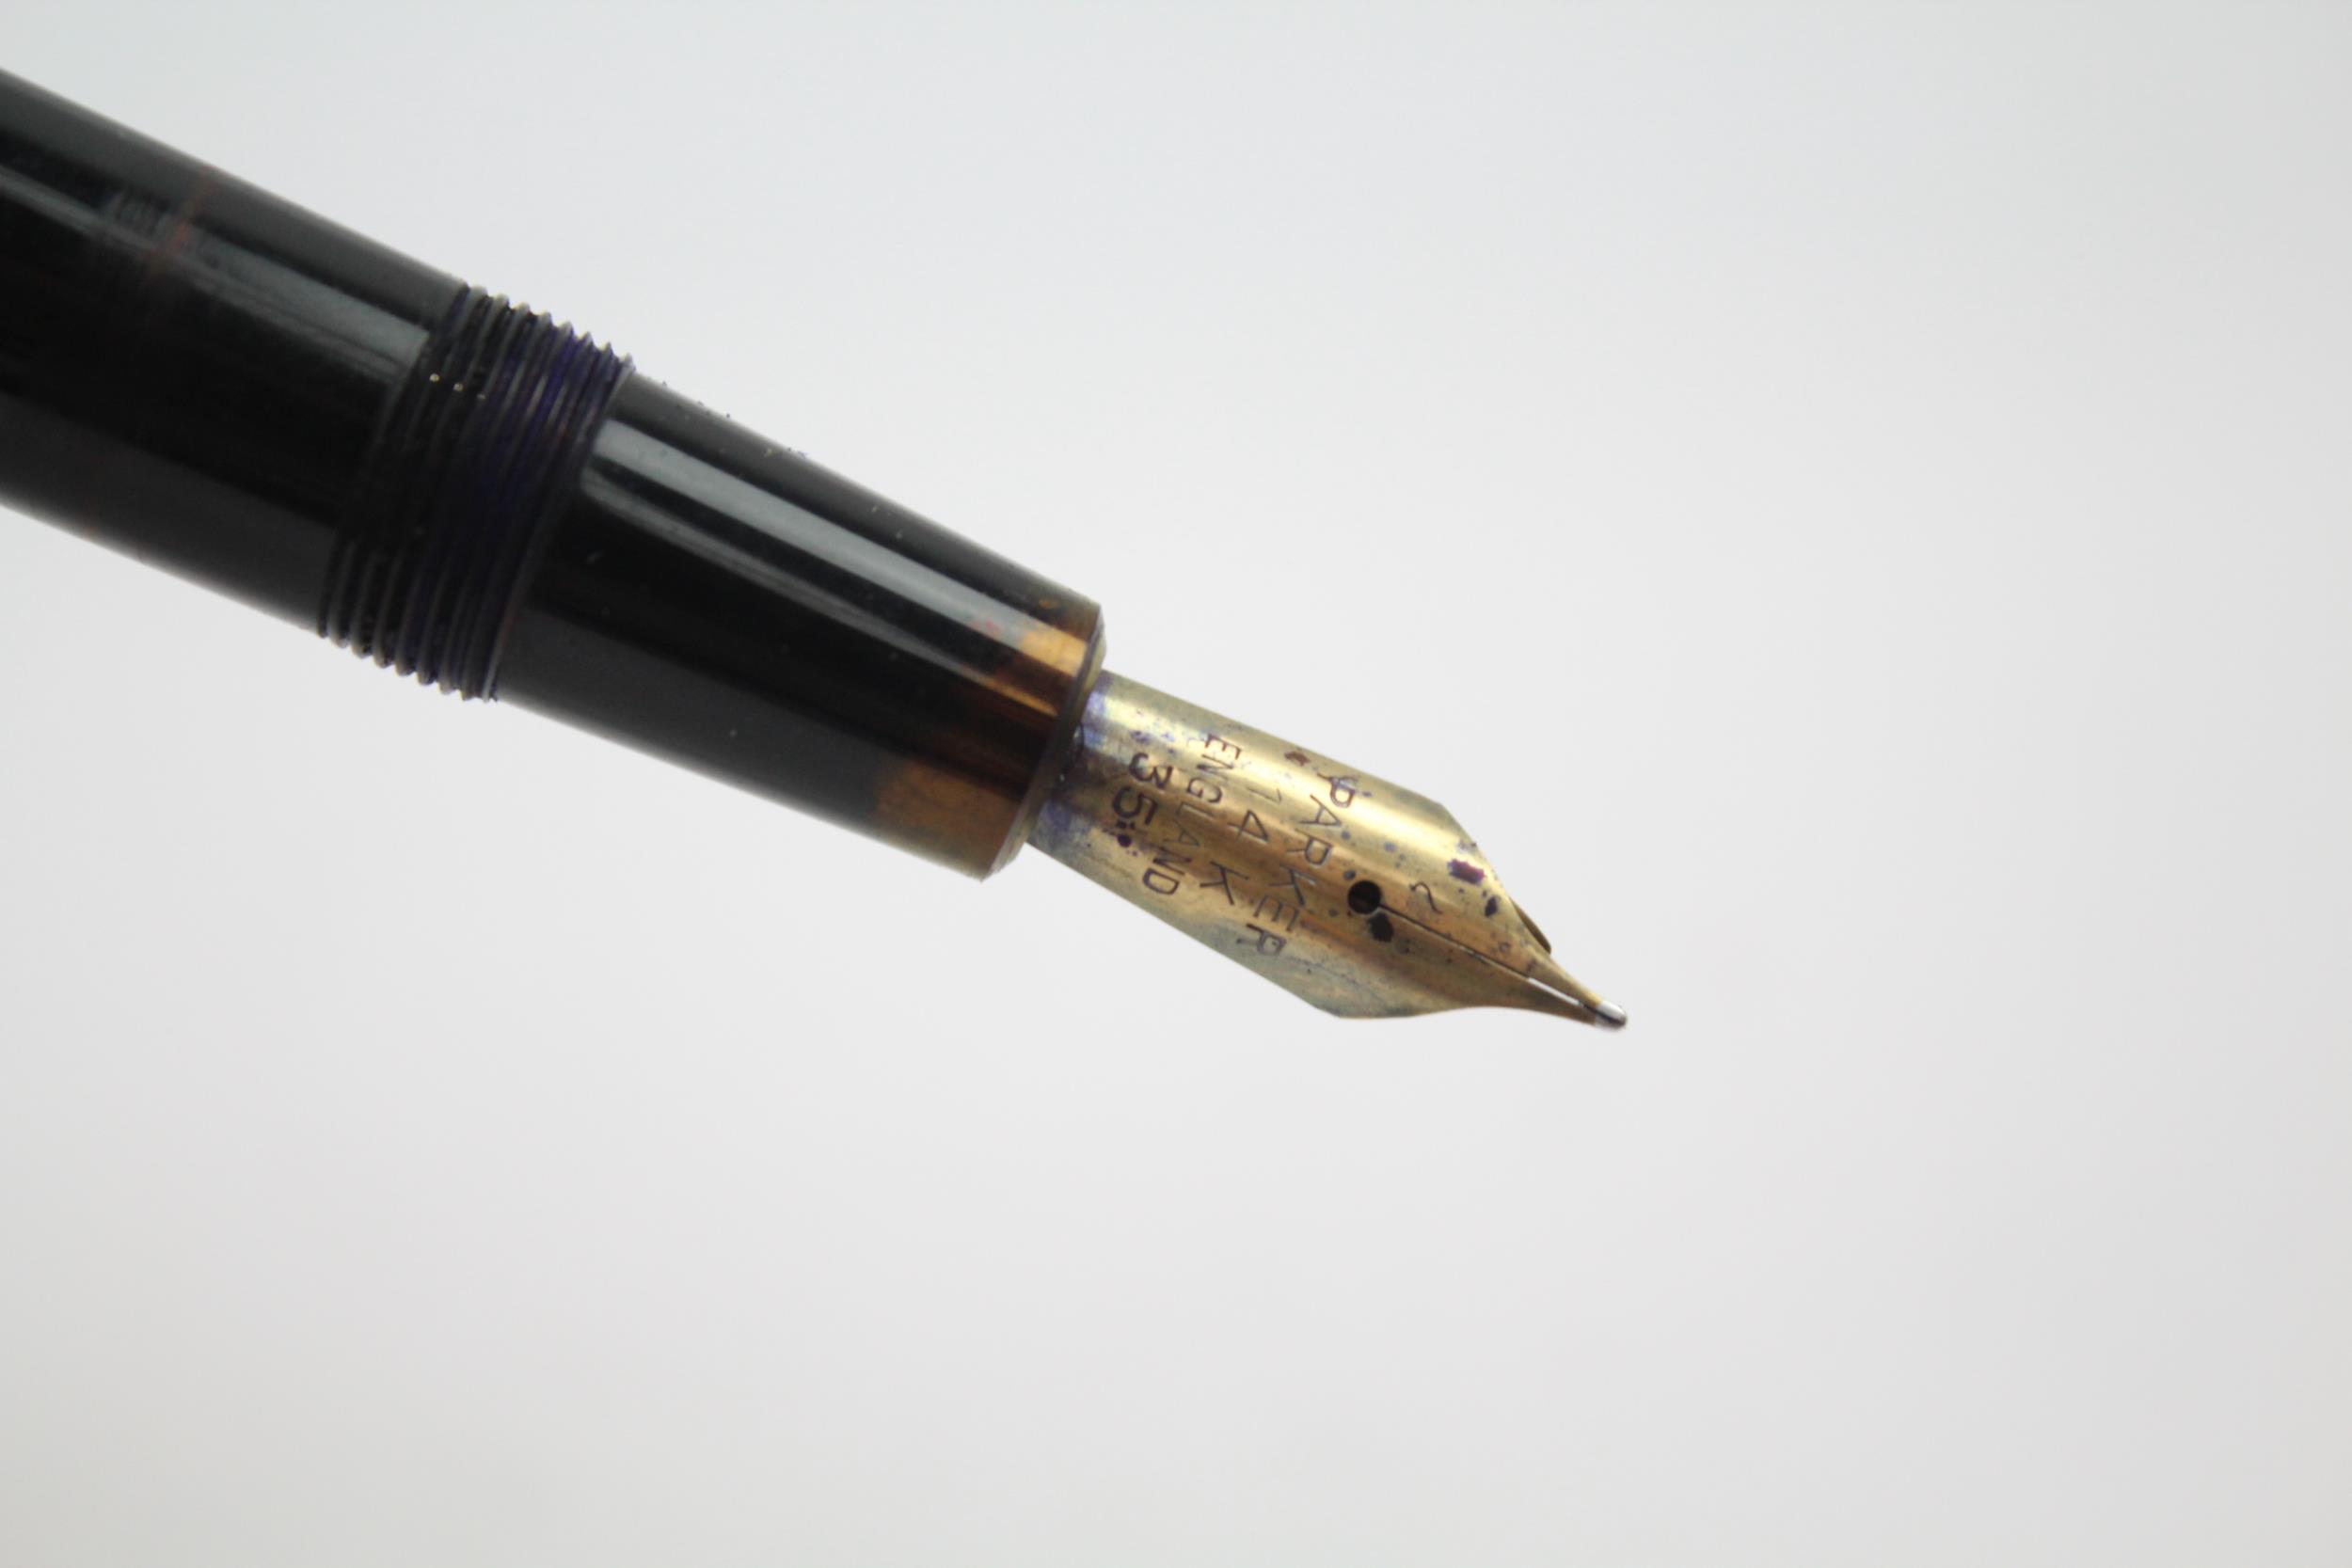 Parker Senior Duofold Fountain Pen Vintage Black 14ct Gold Nib Writing // Dip Tested & WRITING In - Image 3 of 8